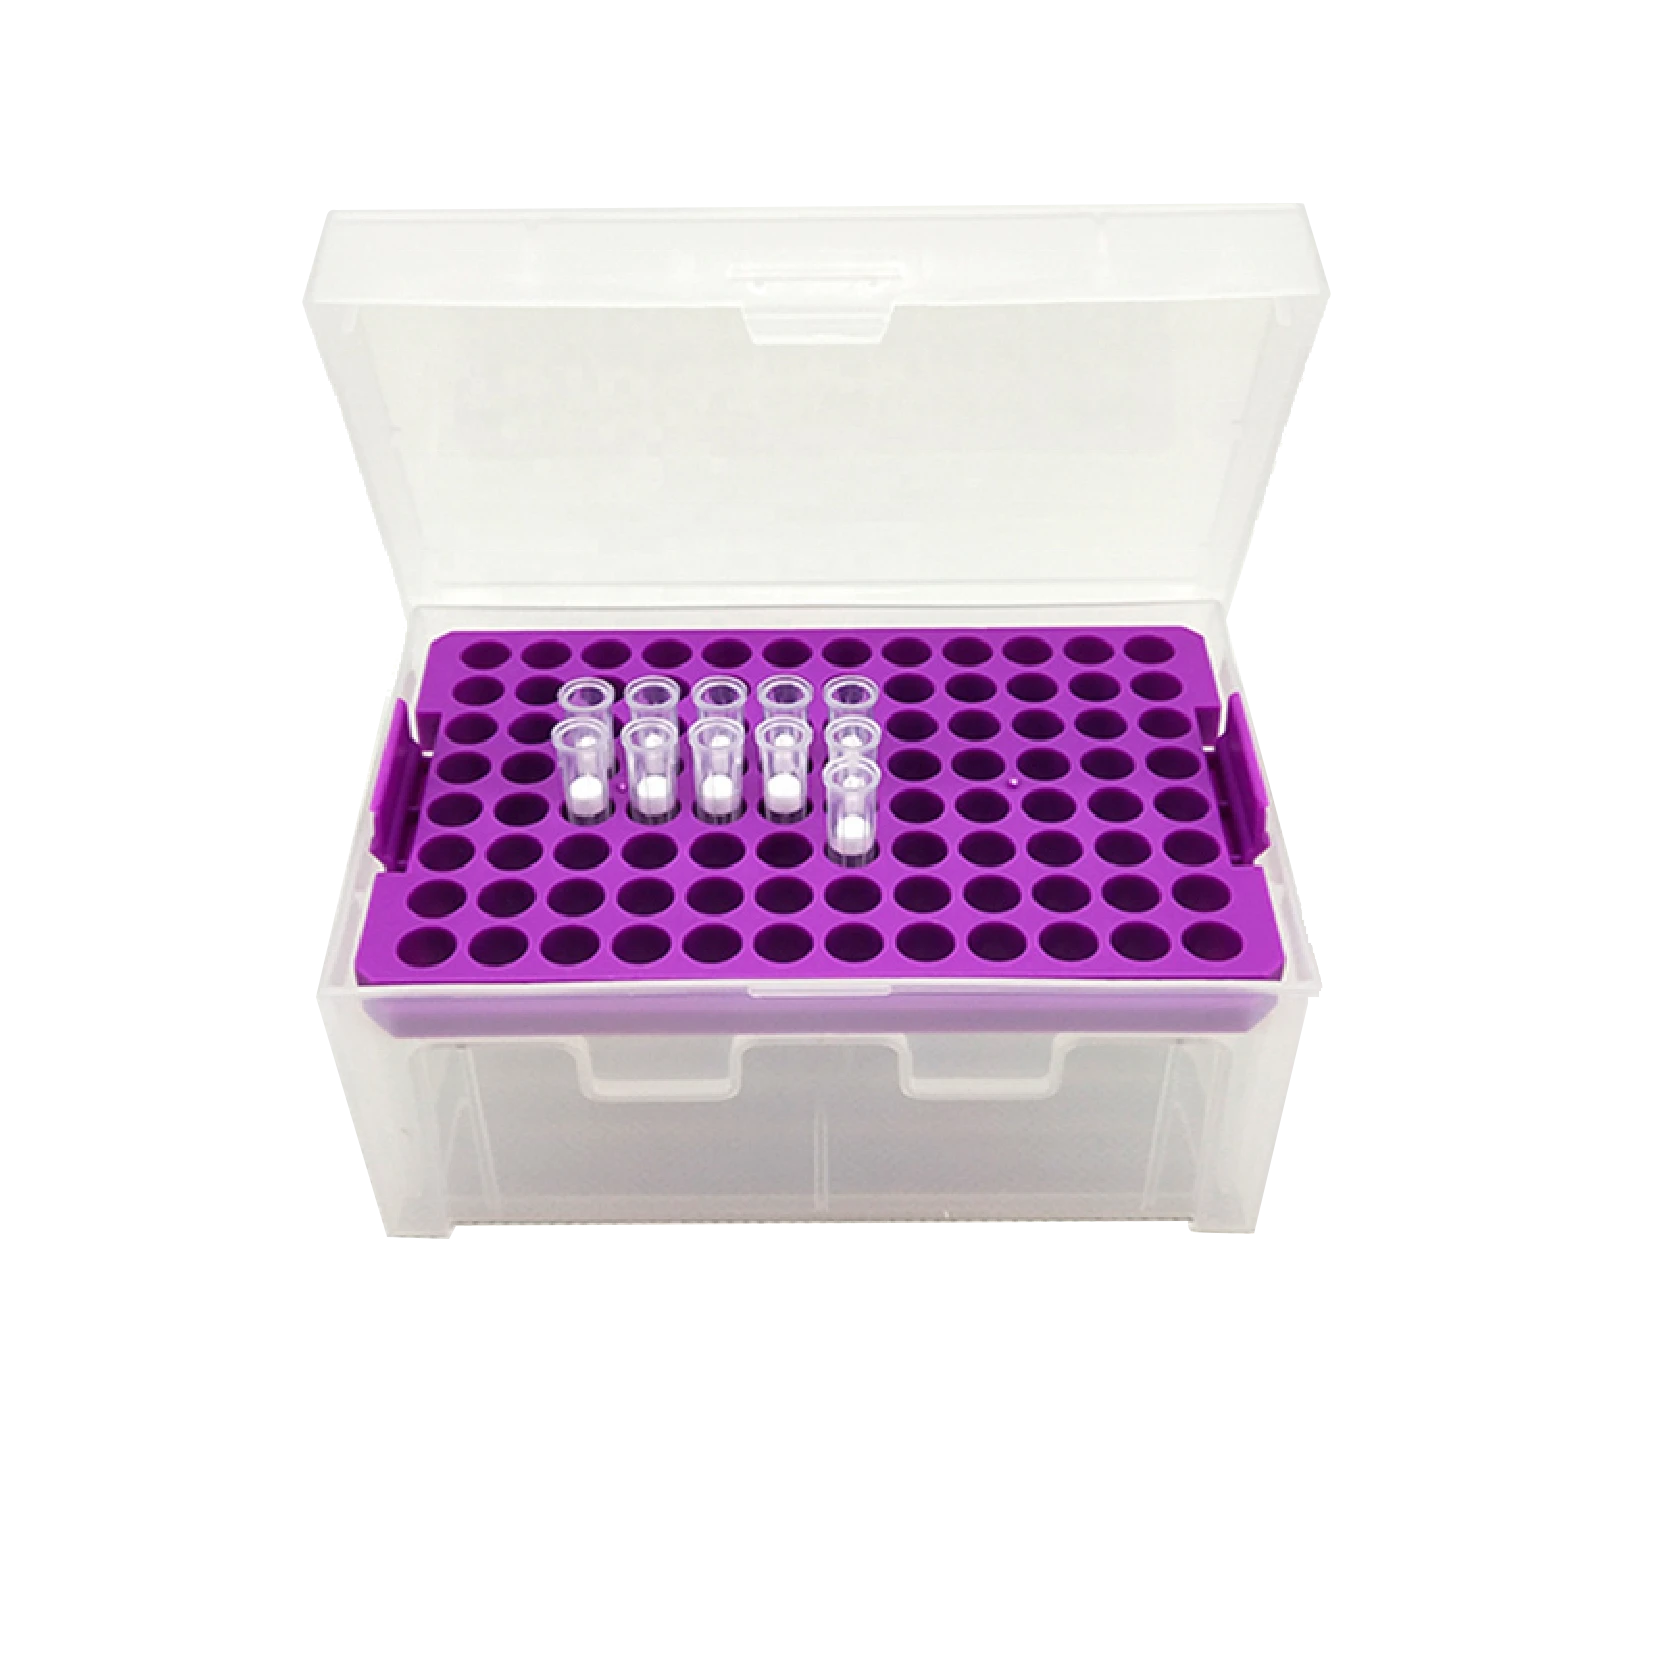 OEM pipette micropipette tip pipette 10ml lts tips - automatic pipet tips 200 pipette